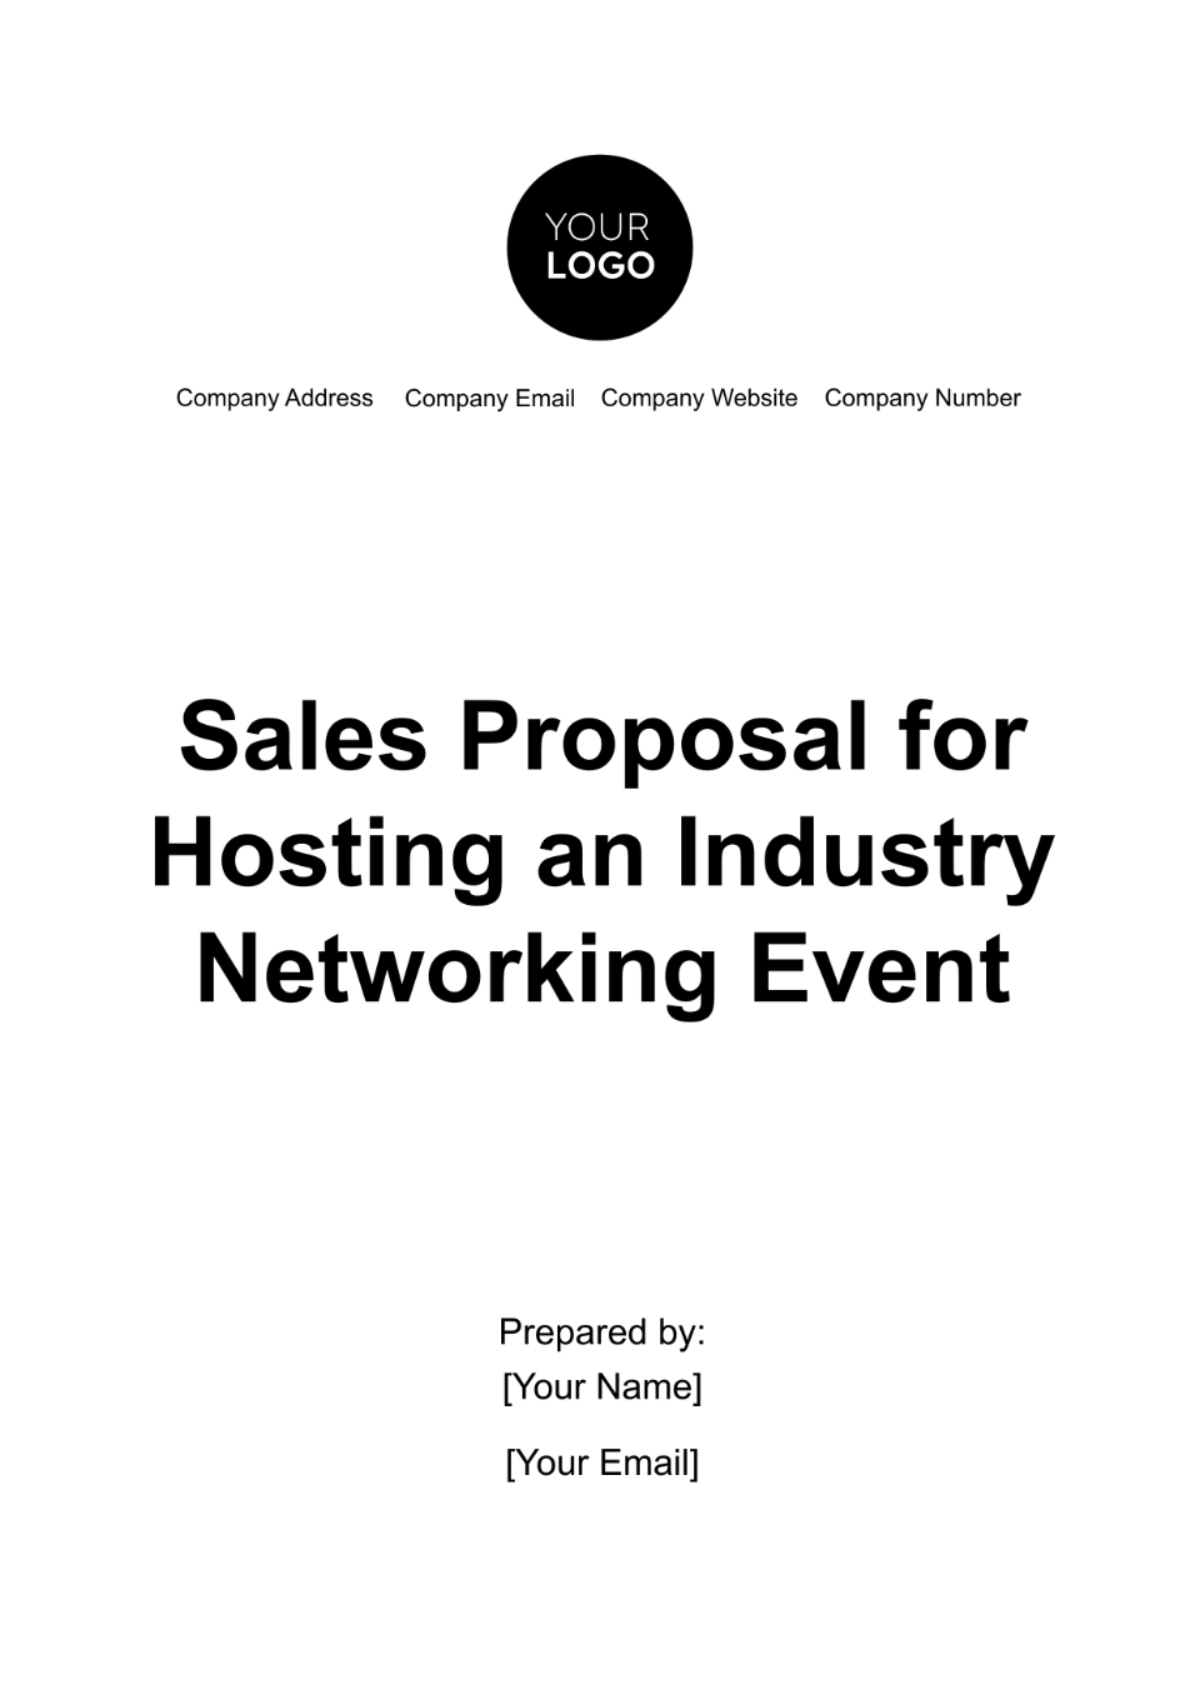 Free Sales Proposal for Hosting an Industry Networking Event Template